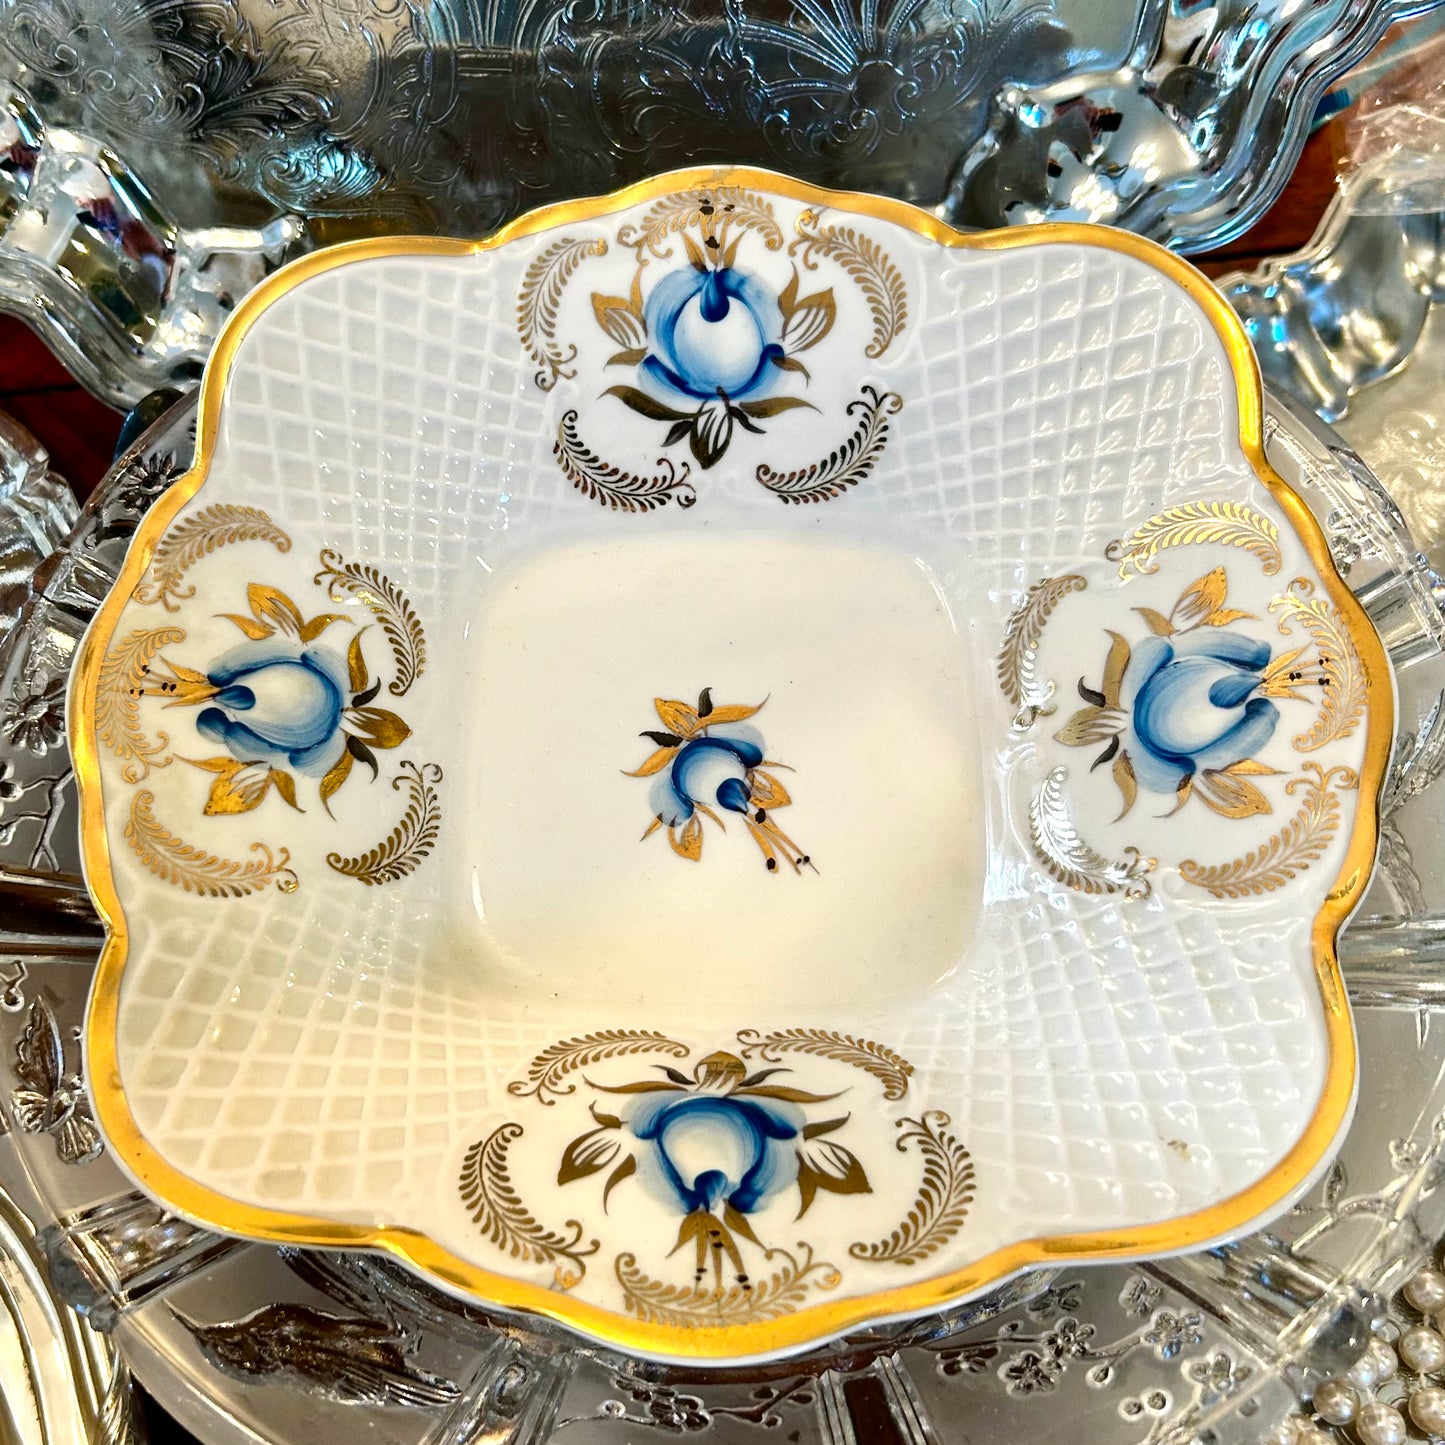 Beautiful blue and white floral lattice scalloped bowl with gold trim